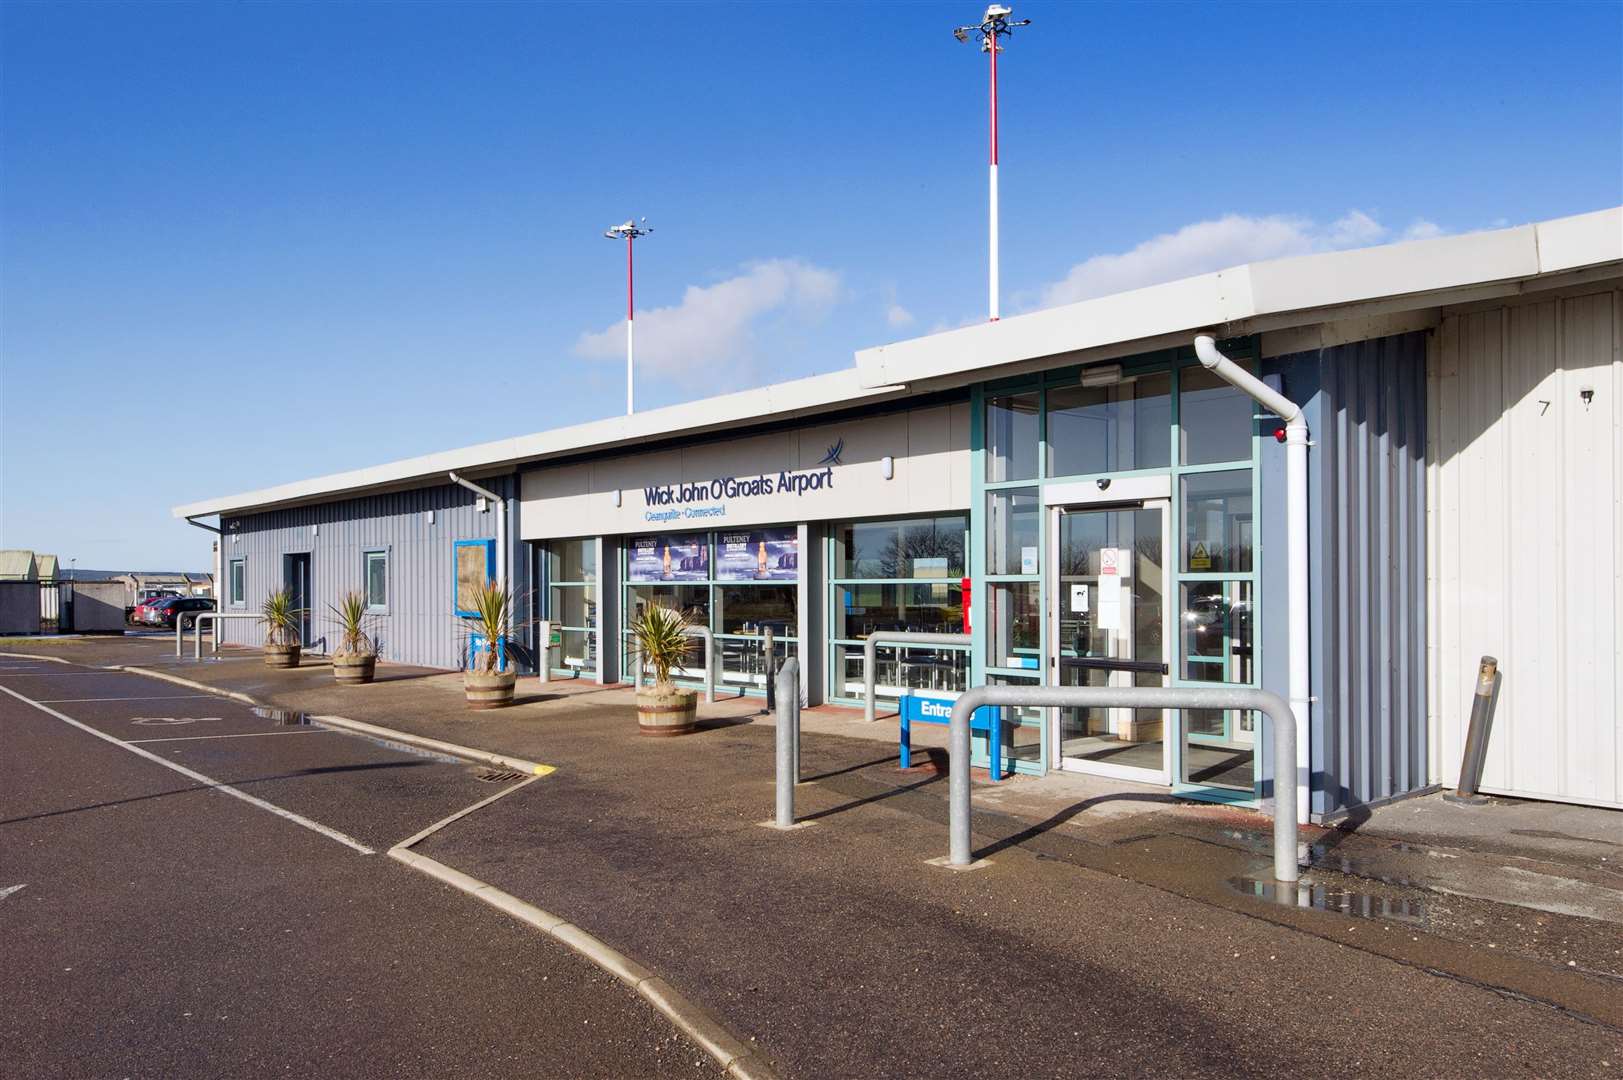 The Scottish Government announced that Wick John O'Groats Airport would receive up to £1 million a year to help its recovery.